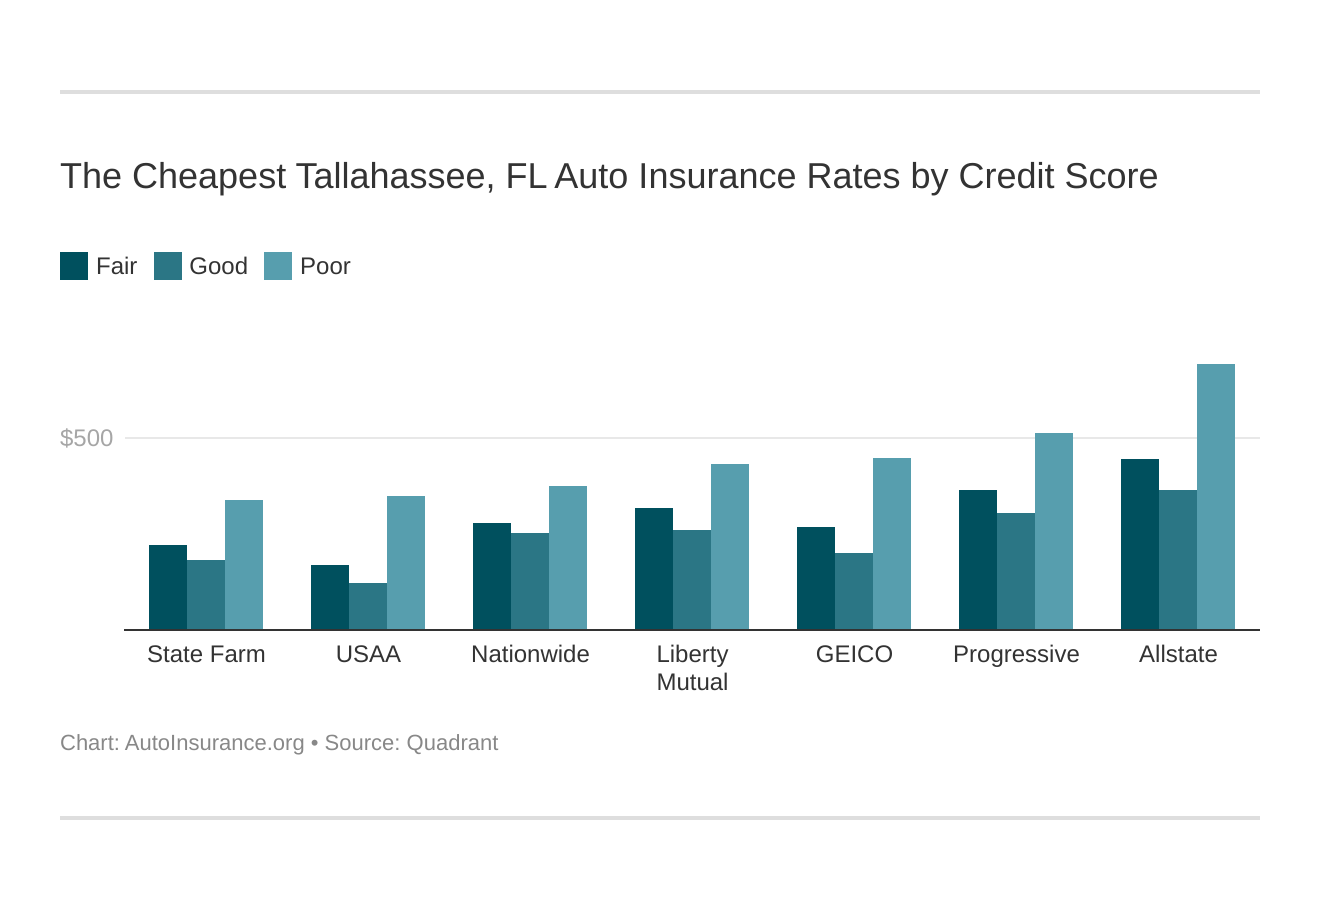 The Cheapest Tallahassee, FL Auto Insurance Rates by Credit Score